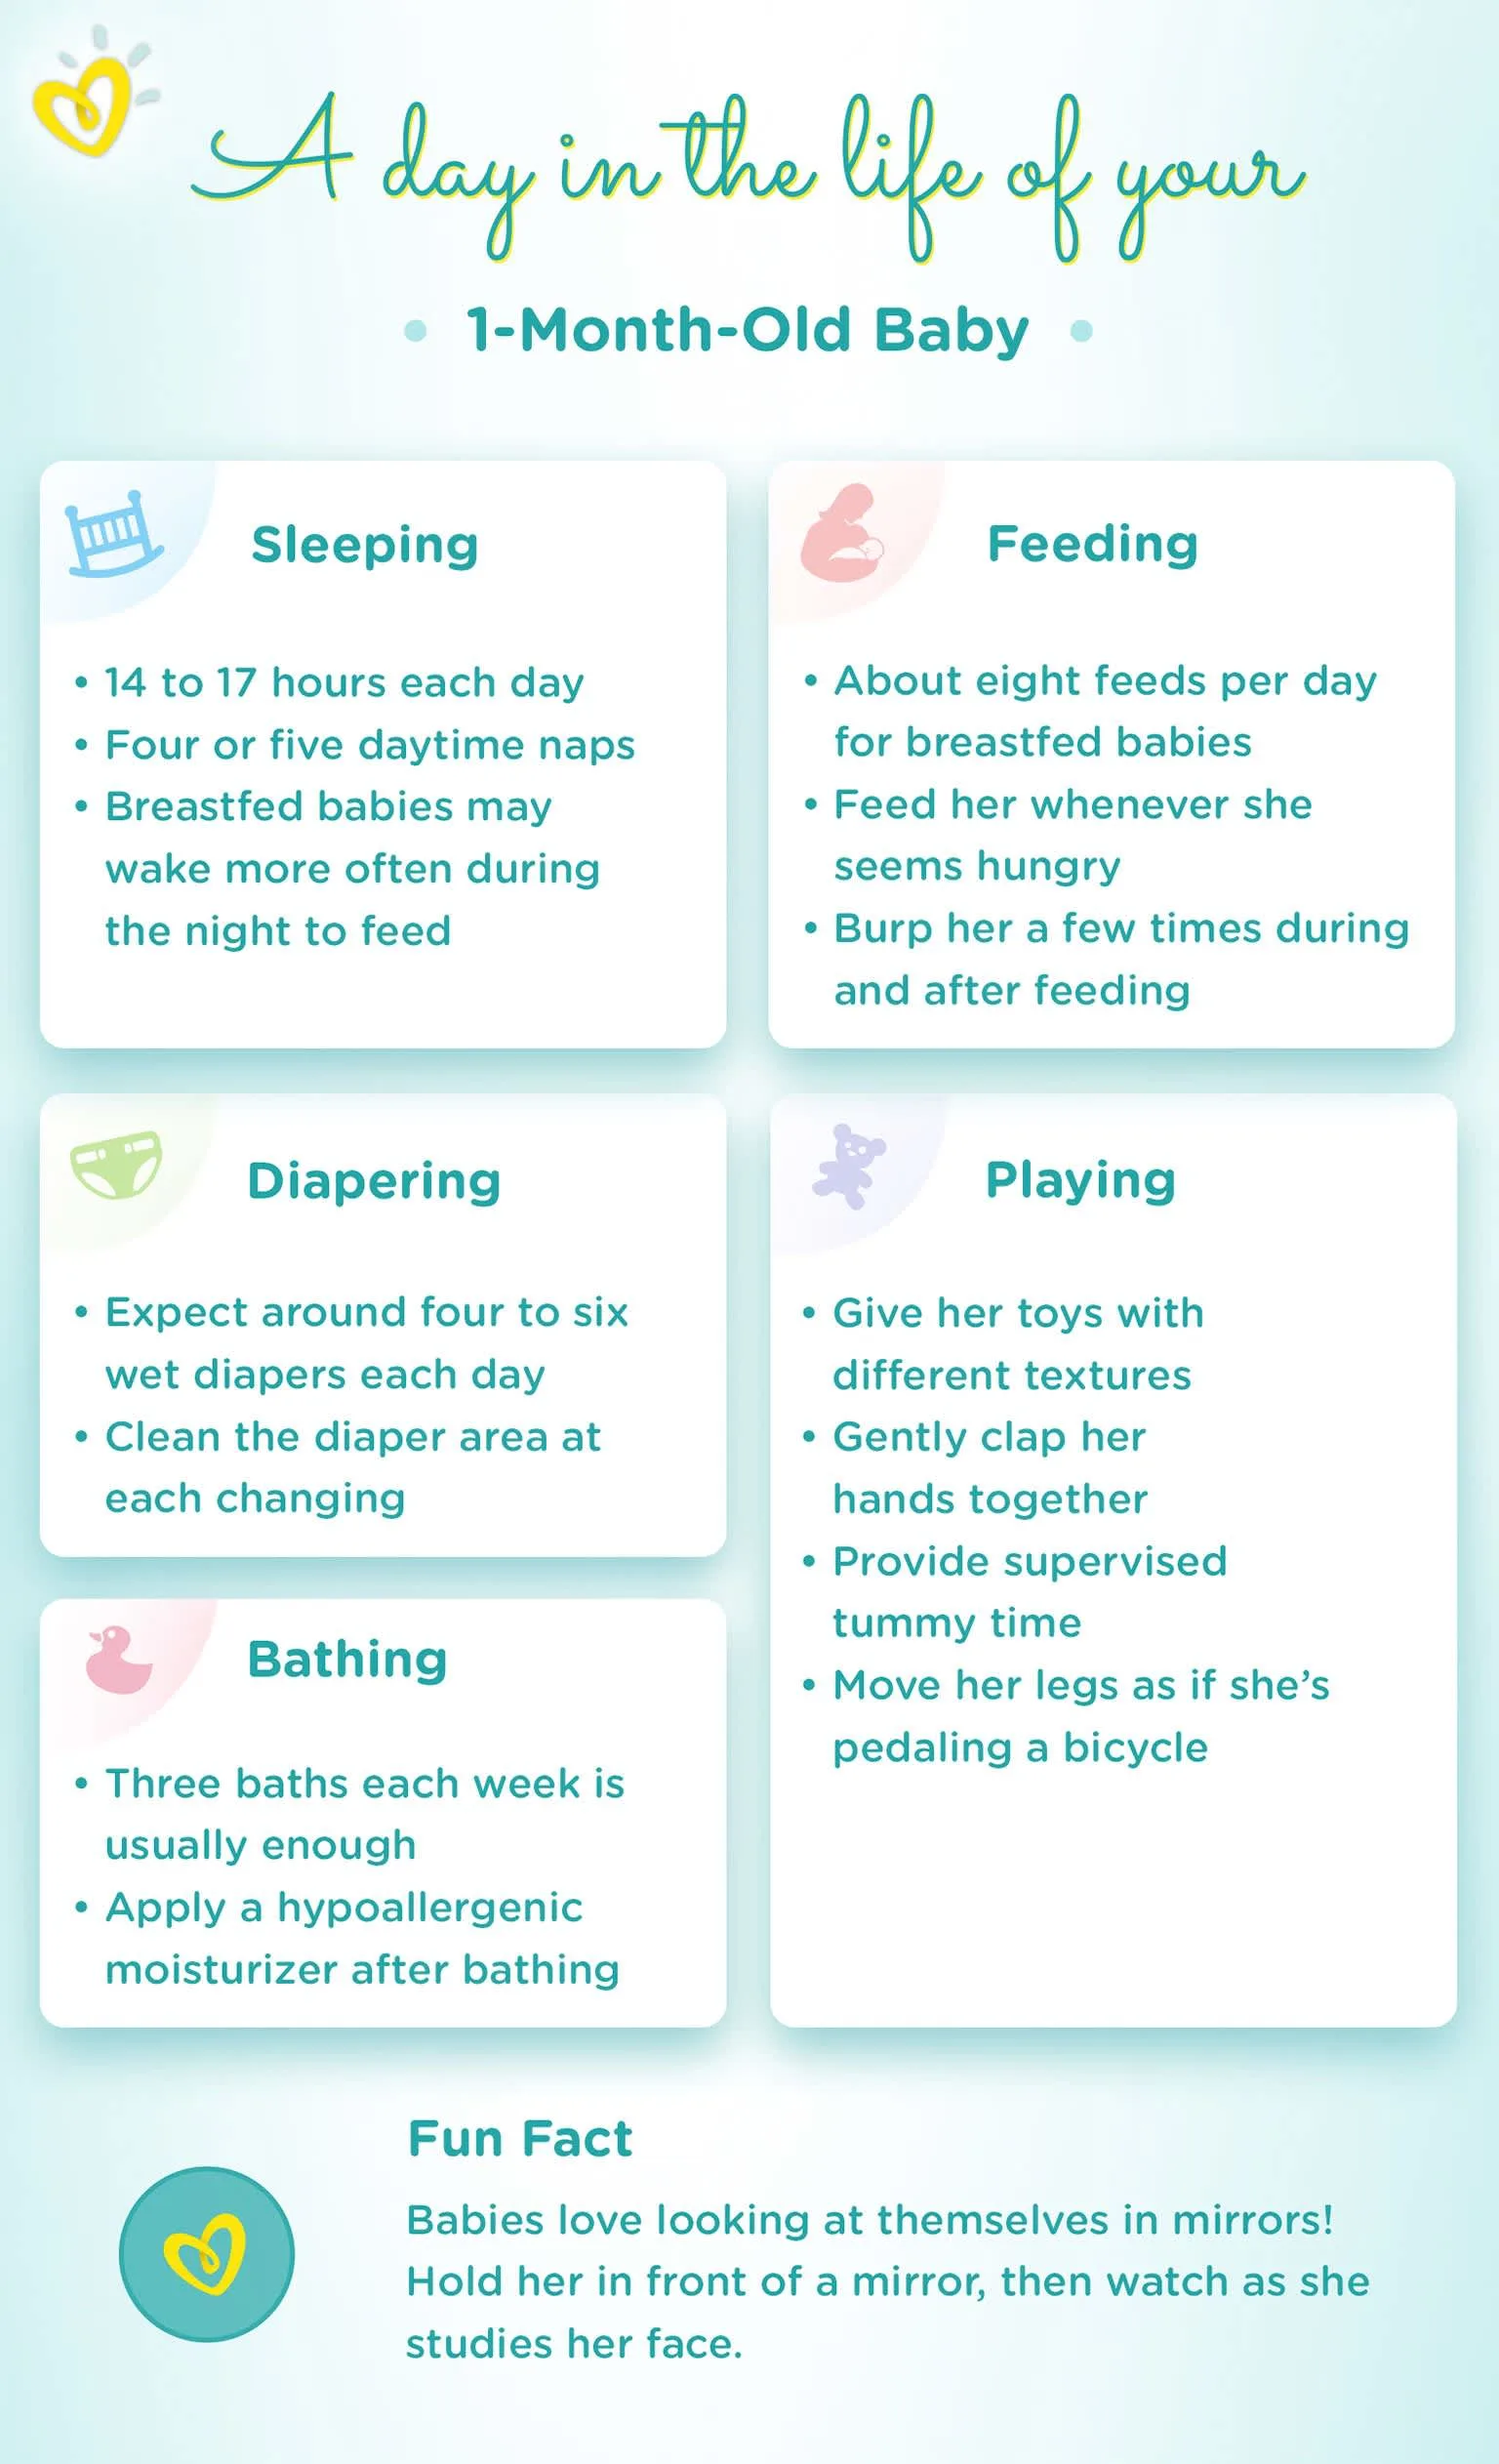 A Day in the Life of Your 1-Month-Old Baby